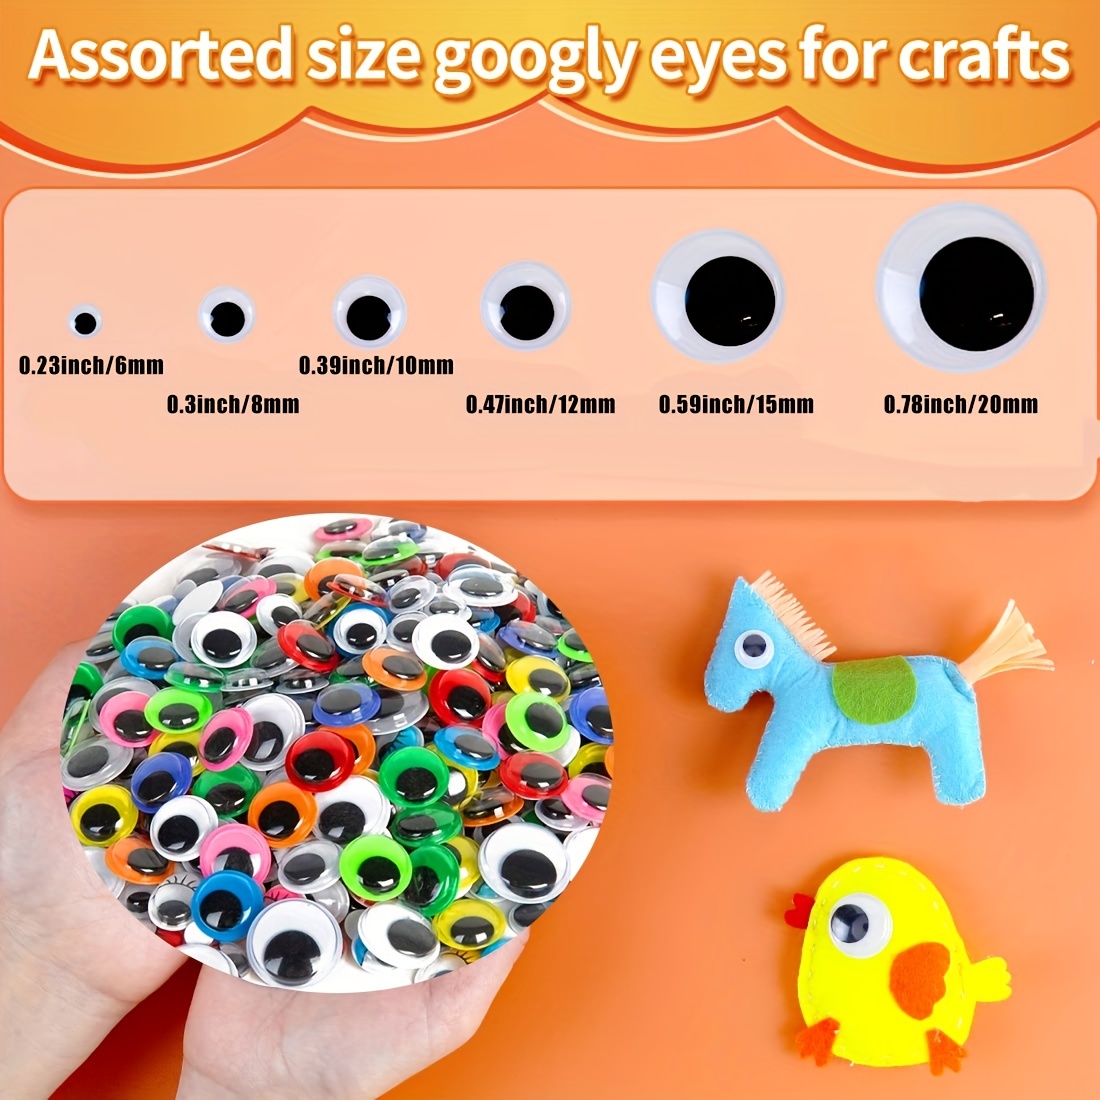 Buy Googly Eyes Stickers - Self Adhesive Wiggle Eye Stickers for